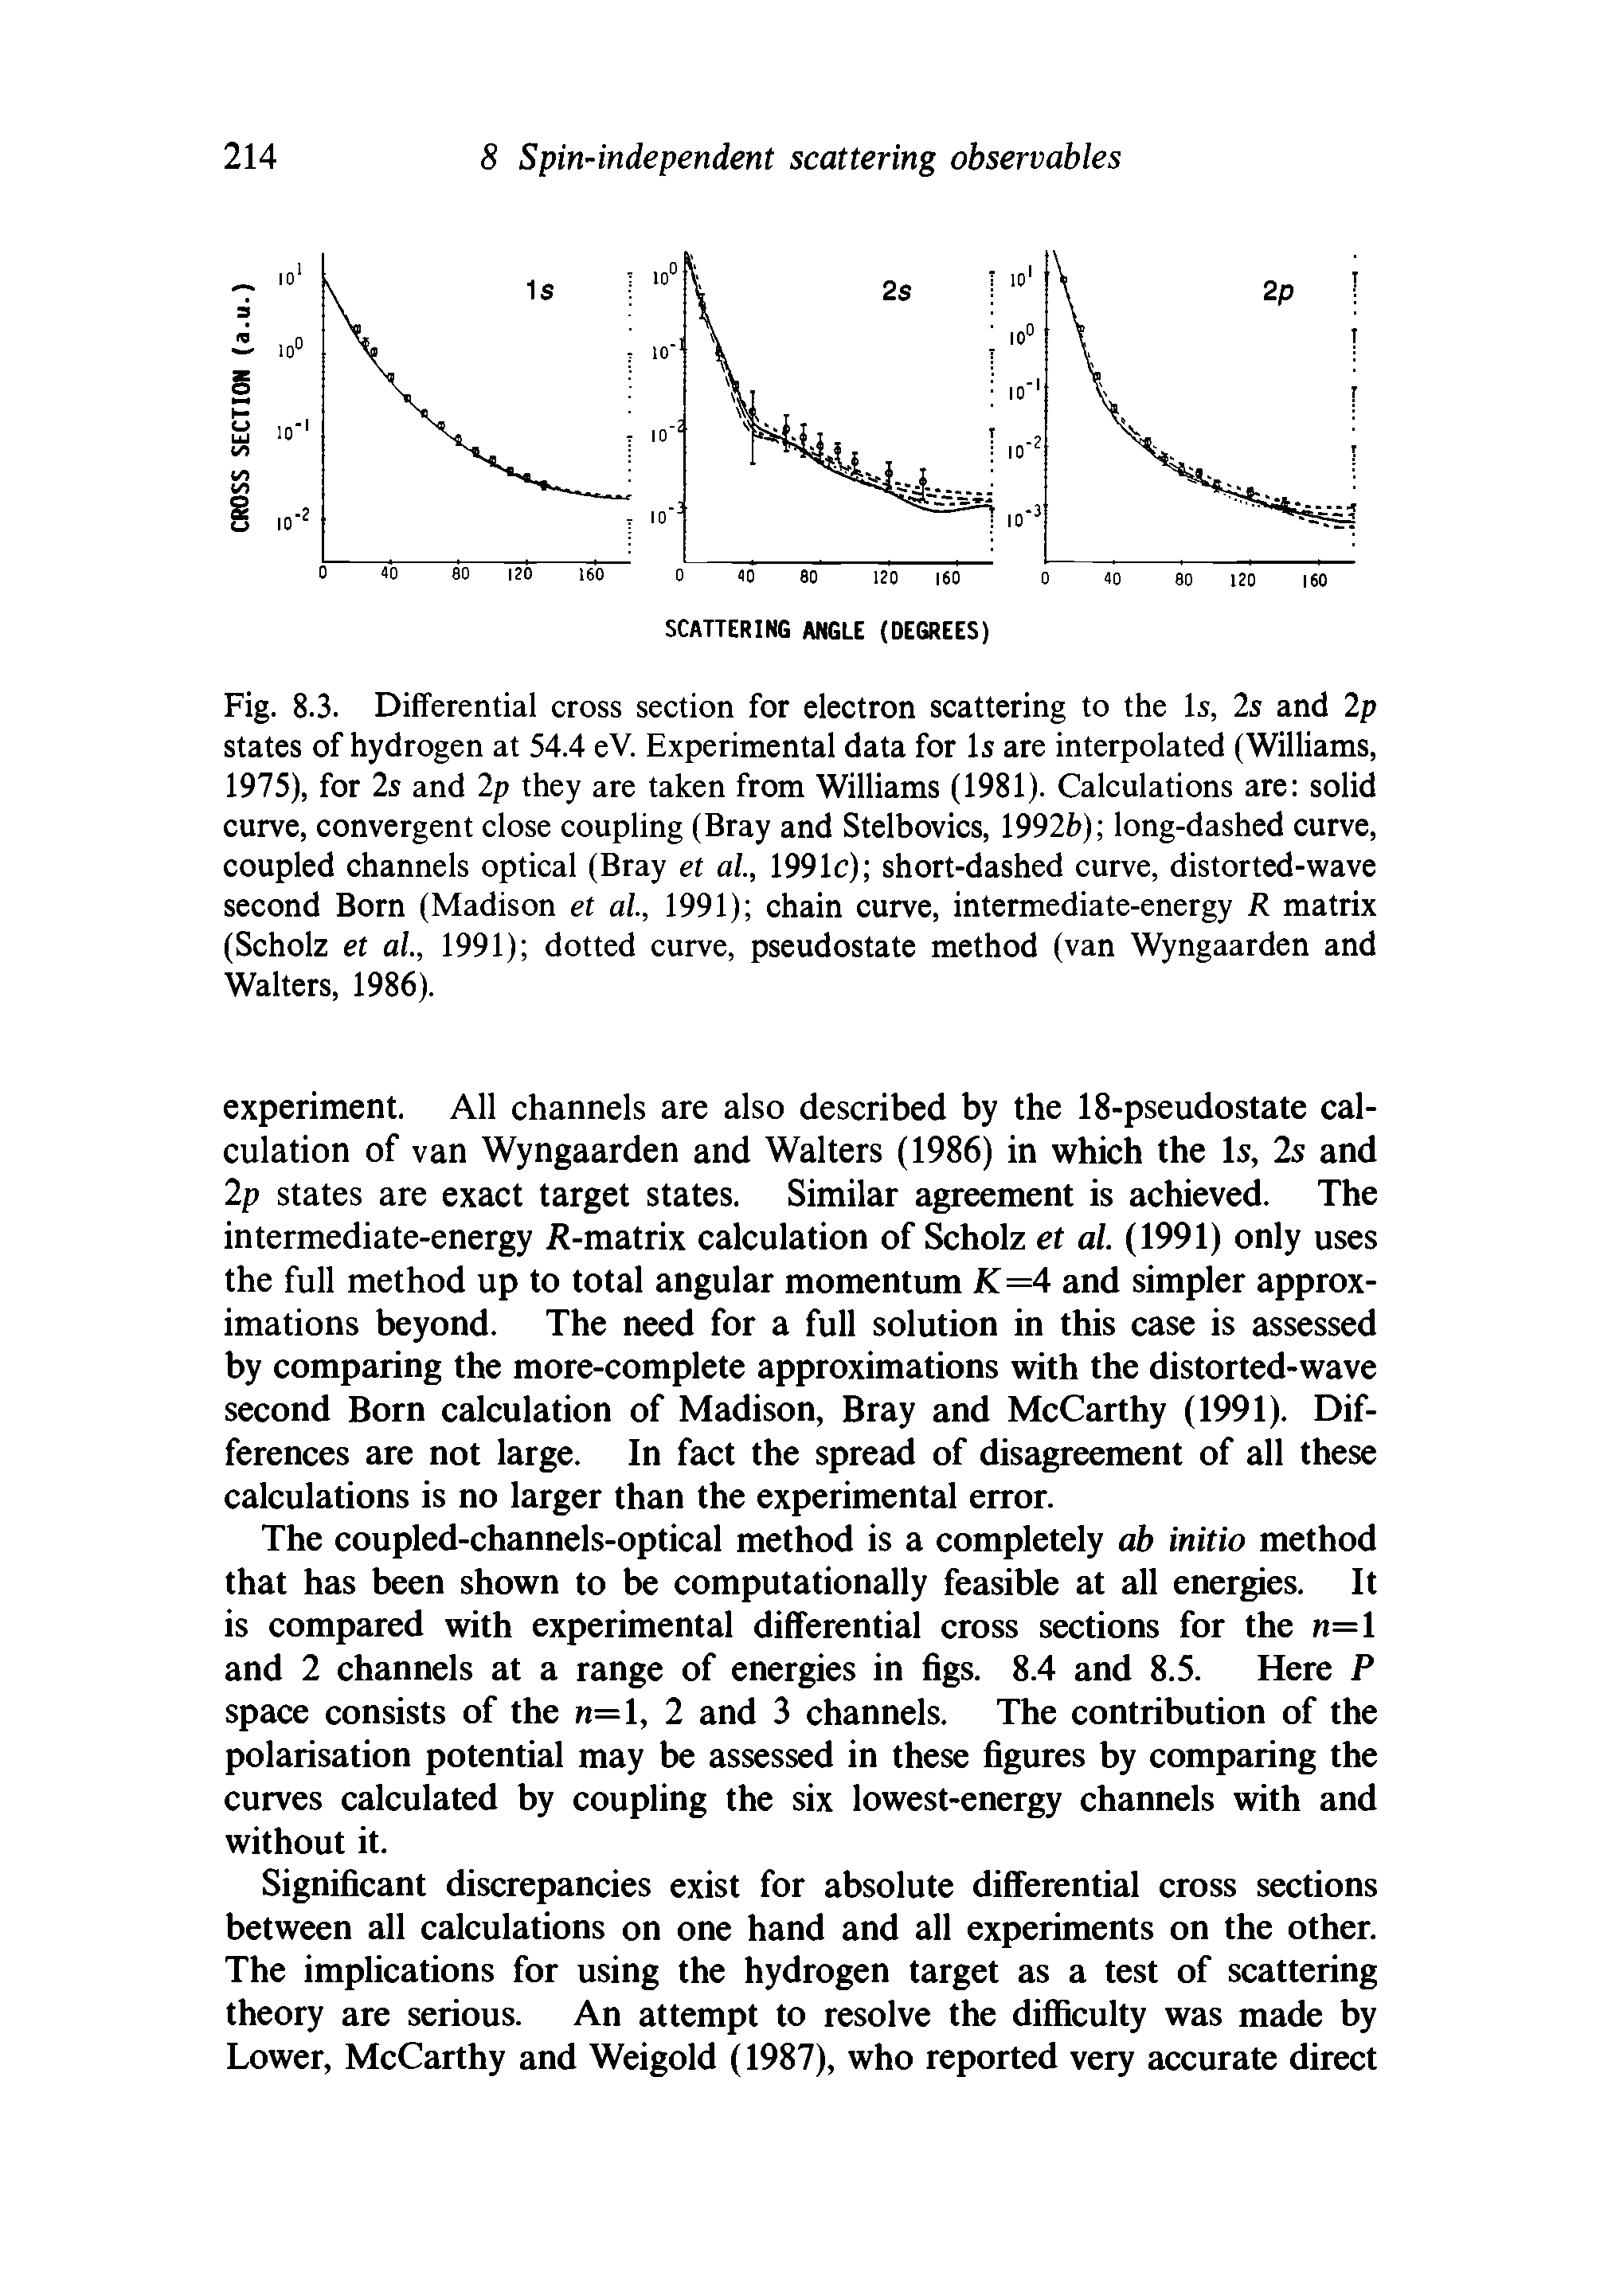 Fig. 8.3. Differential cross section for electron scattering to the Is, 2s and 2p states of hydrogen at 54.4 eV. Experimental data for Is are interpolated (Williams, 1975), for 2s and 2p they are taken from Williams (1981). Calculations are solid curve, convergent close coupling (Bray and Stelbovics, 1992h) long-dashed curve, coupled channels optical (Bray et al, 1991c) short-dashed curve, distorted-wave second Born (Madison et al, 1991) chain curve, intermediate-energy R matrix (Scholz et al, 1991) dotted curve, pseudostate method (van Wyngaarden and Walters, 1986).